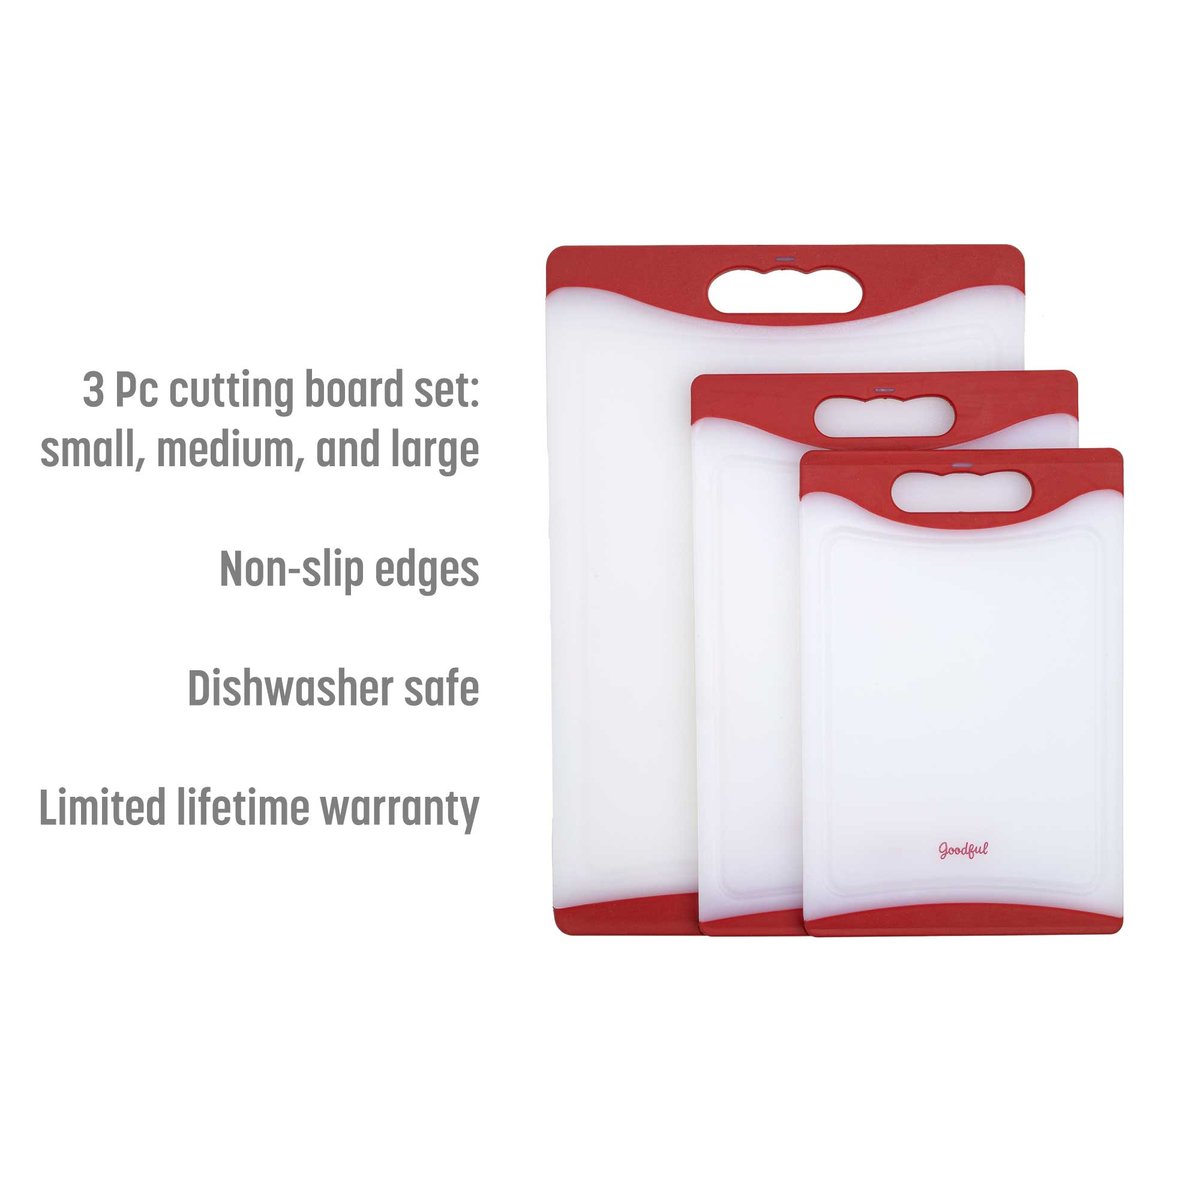 Goodful Cutting Board (3 Piece Set)- Non-Slip Edges, Easy Grip Handles,  Made without BPA, Non-Porous, Dishwasher Safe, Multiple Sizes, Red